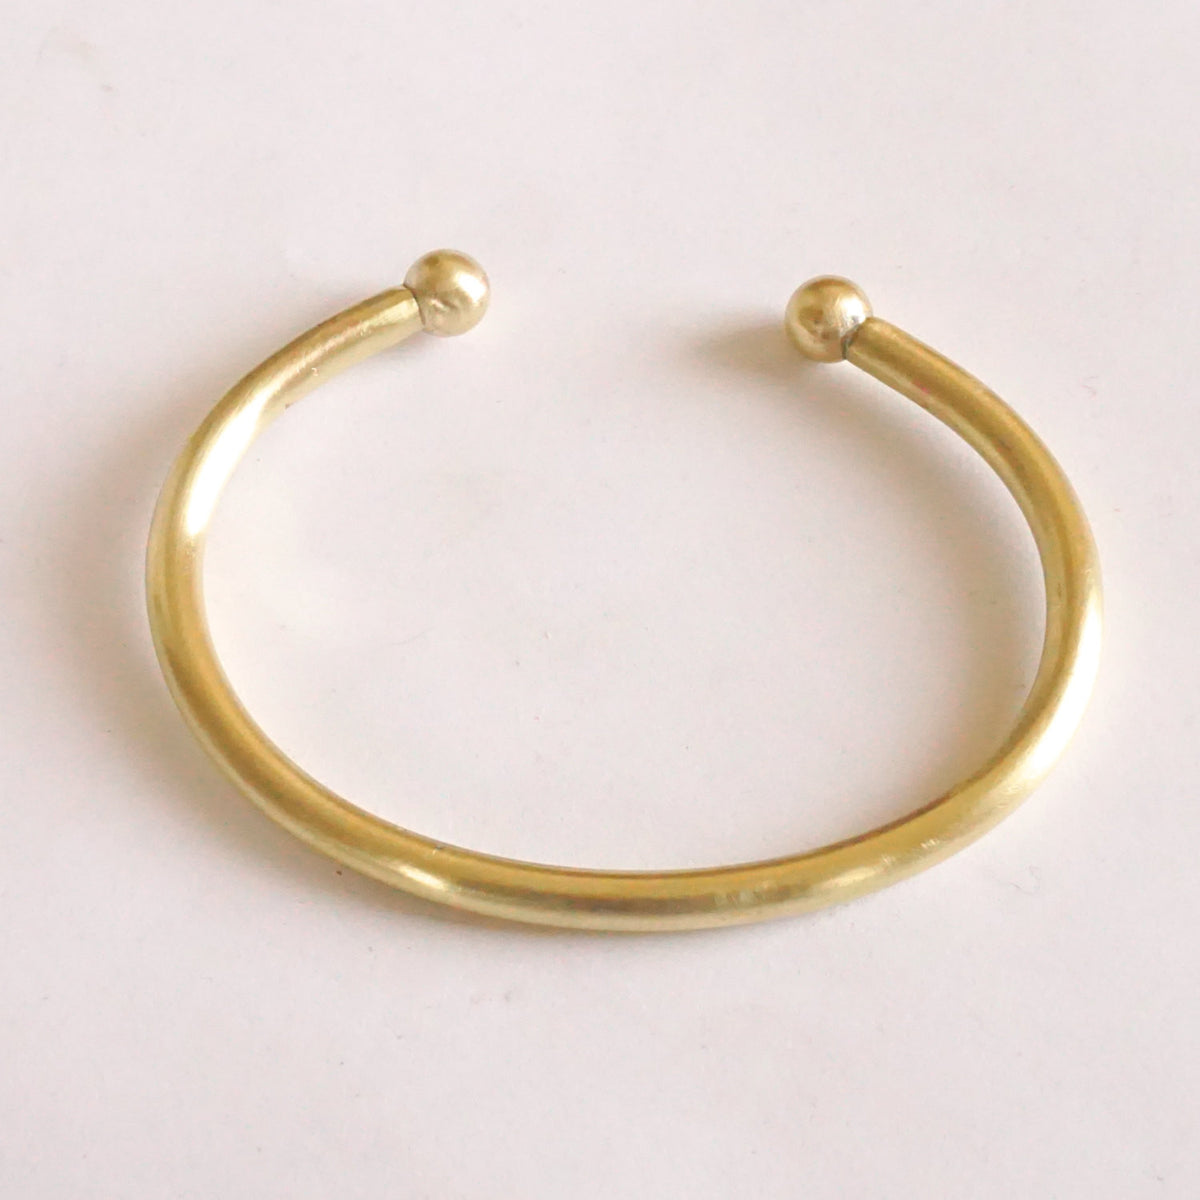 Classic Hand-Made Gold Colored Brass or Sterling Silver Torque Bracelet w/ Solid Ball Ends - 0198 - Virginia Wynne Designs